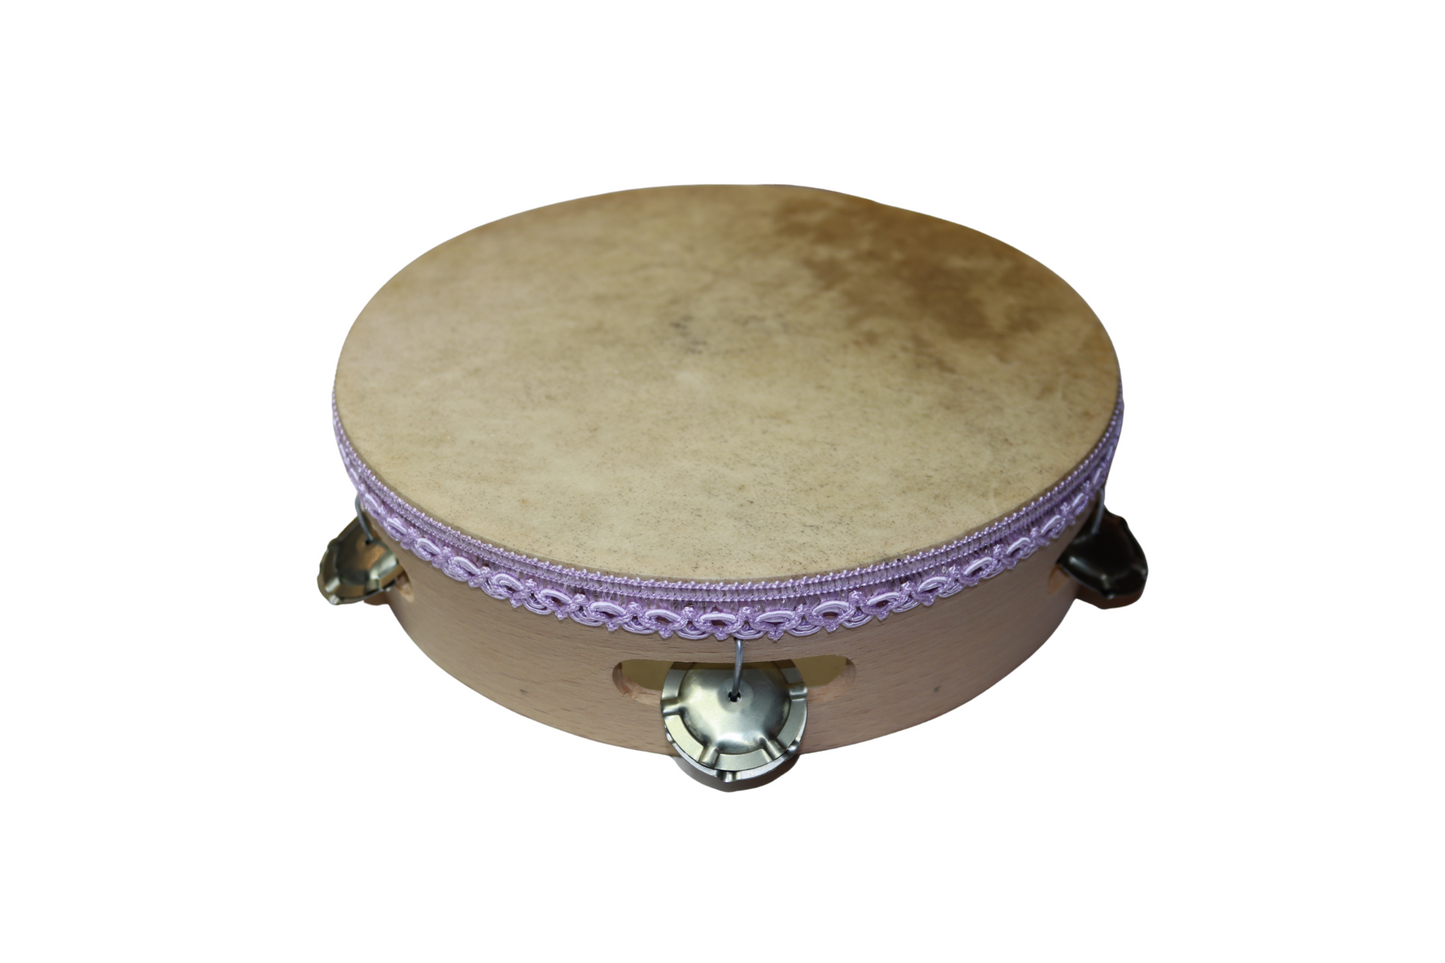 Tambourine for the tarantella, a circular percussion instrument, typical of the popular musical tradition of Calabria.